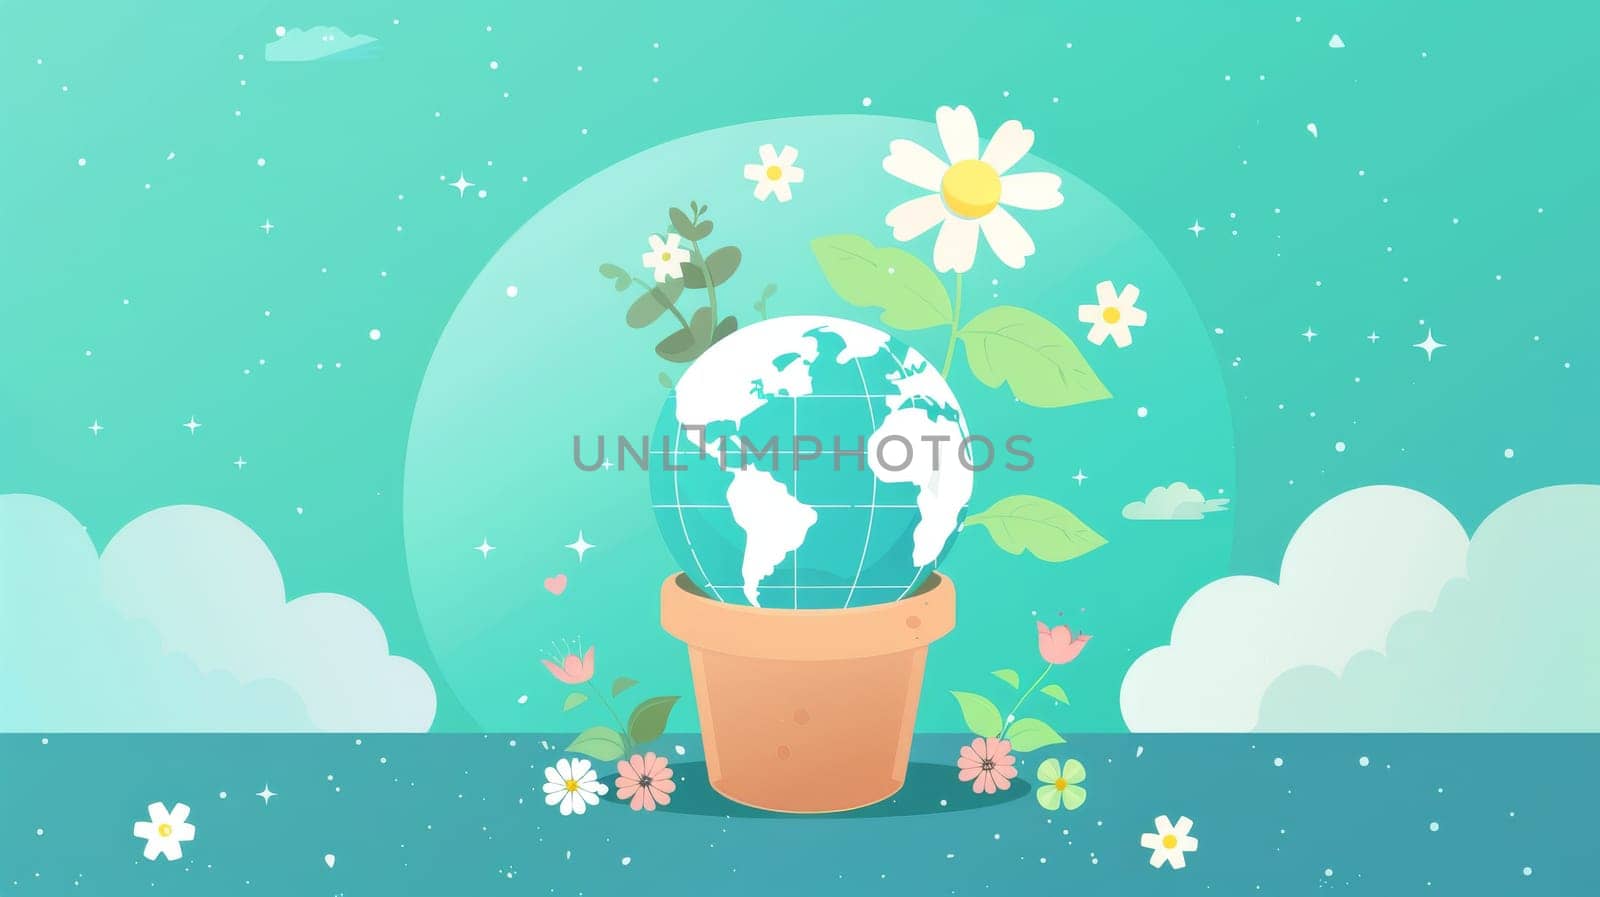 The concept of a Happy Earth day background modern. Save the earth, globe, flower, earth hugging flower pot, and cloud. Eco friendly design for web, banner, campaign, social media posting.